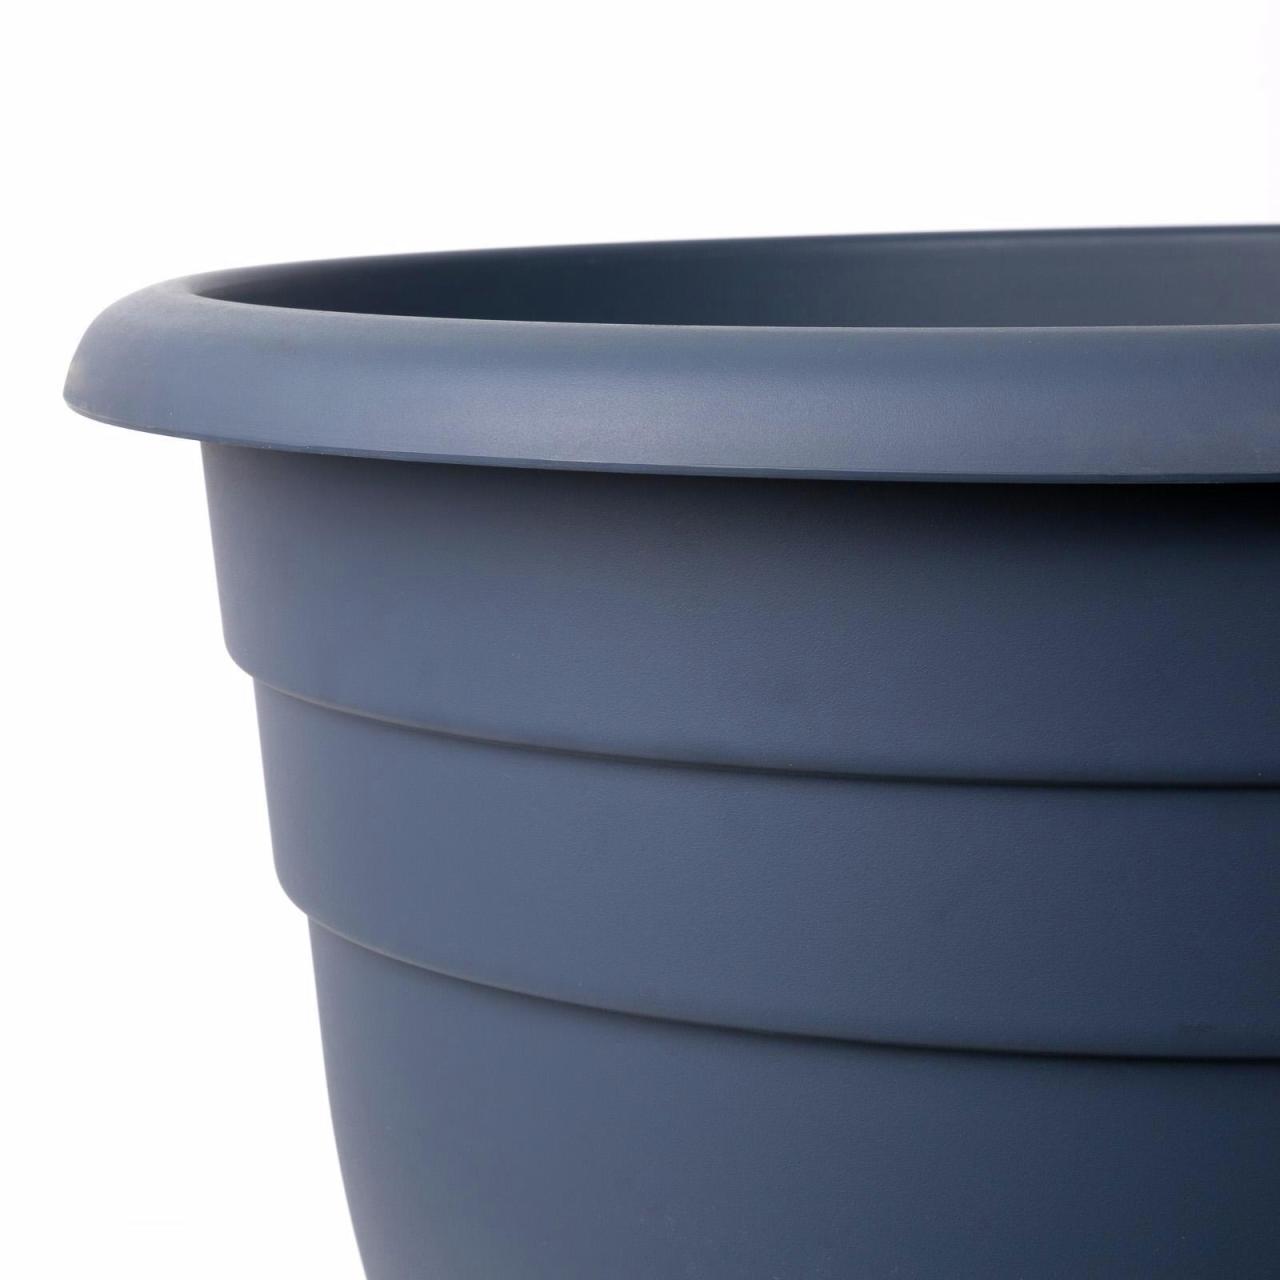 Hanging Plants Indoor | Bunnings Lightweight Pots: Elevate Your Gardening with Enhanced Portability and Durability